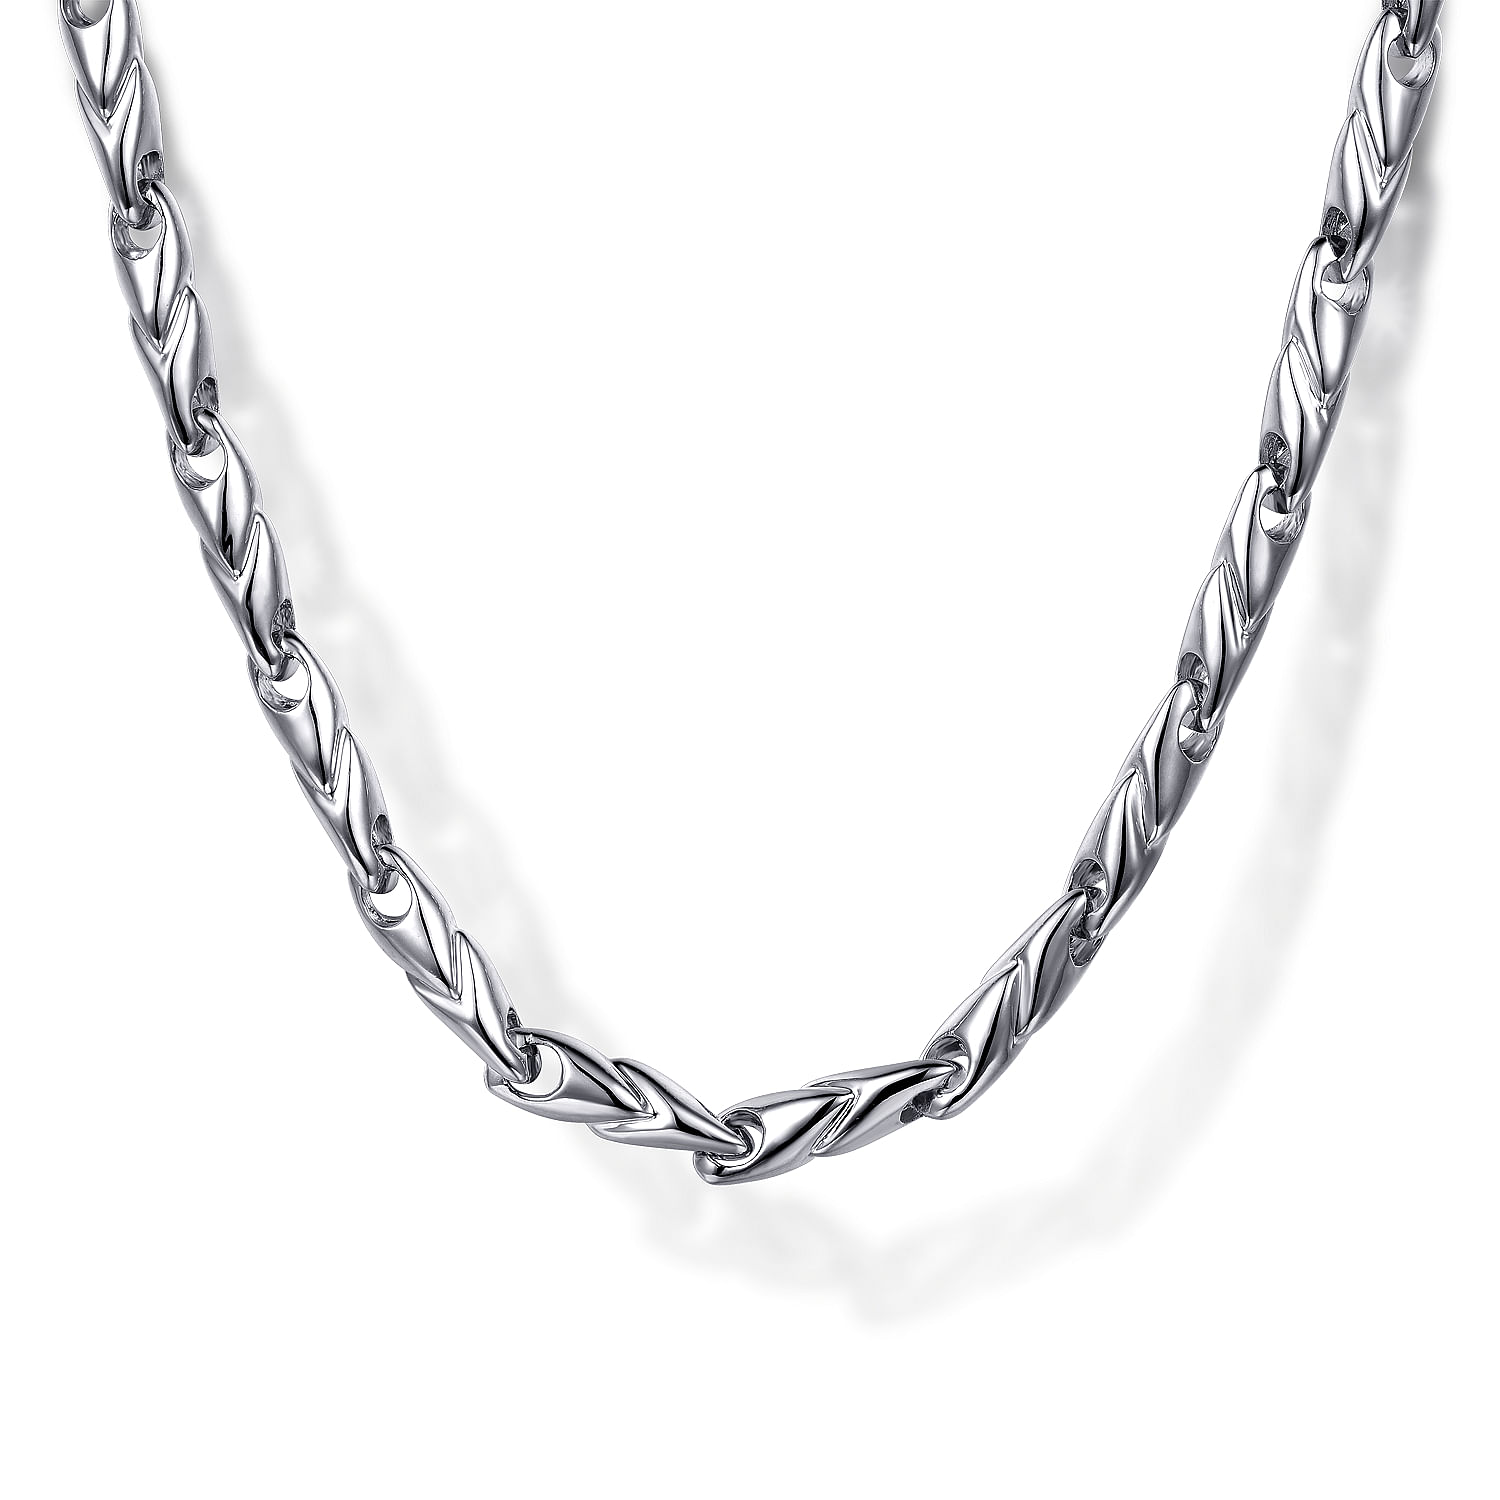 20 Inch 925 Sterling Silver Men's Chain Necklace